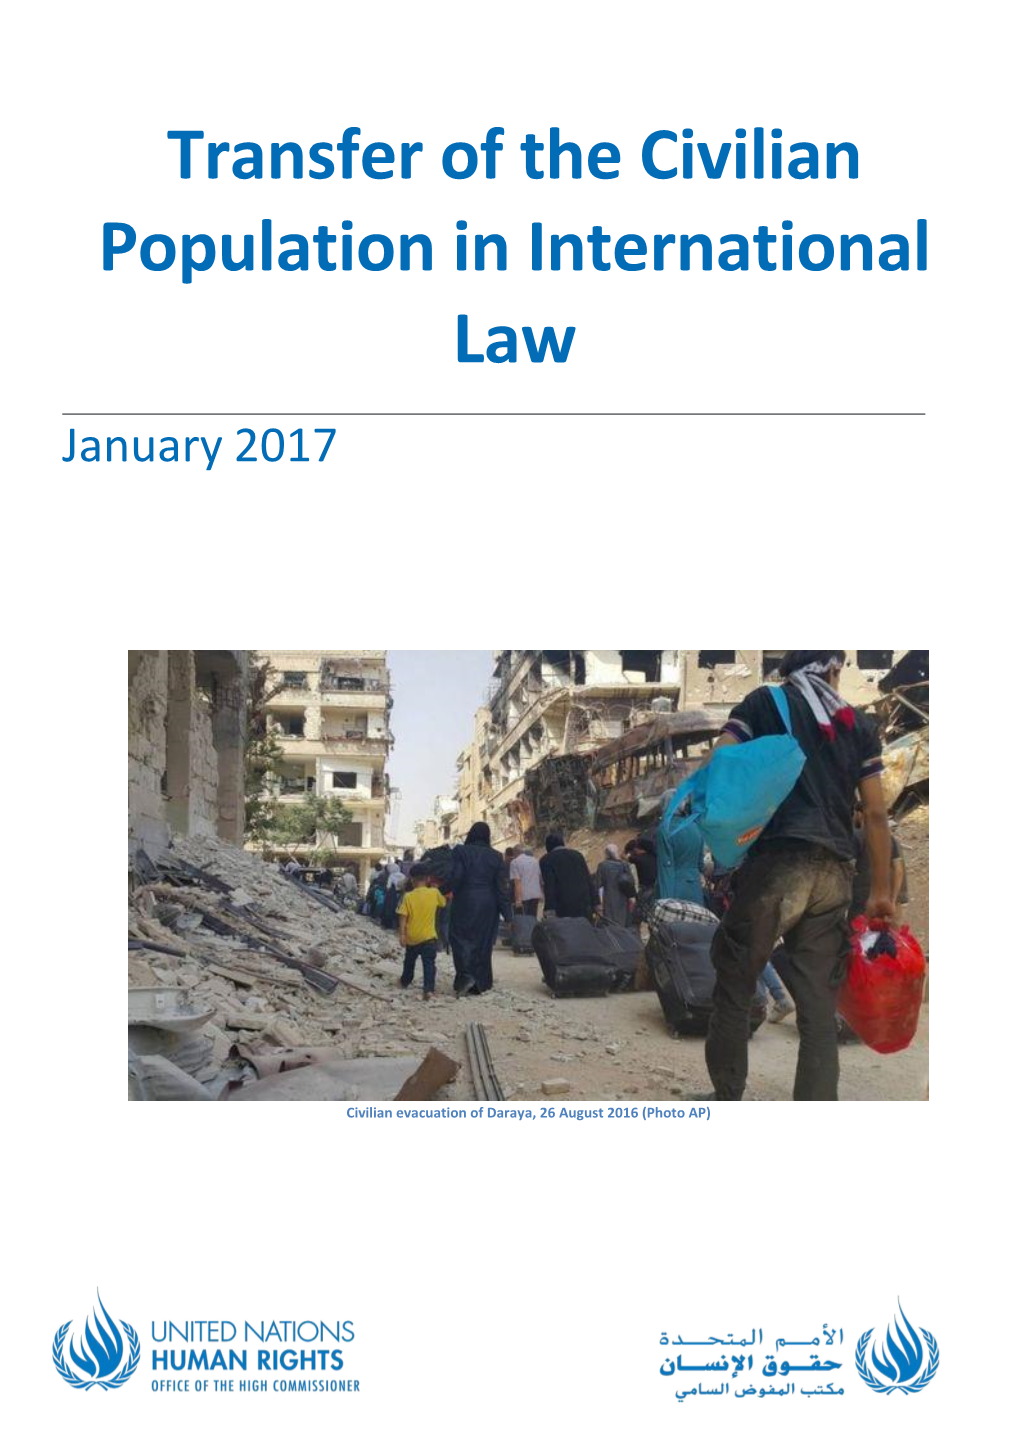 Transfer of the Civilian Population in International Law